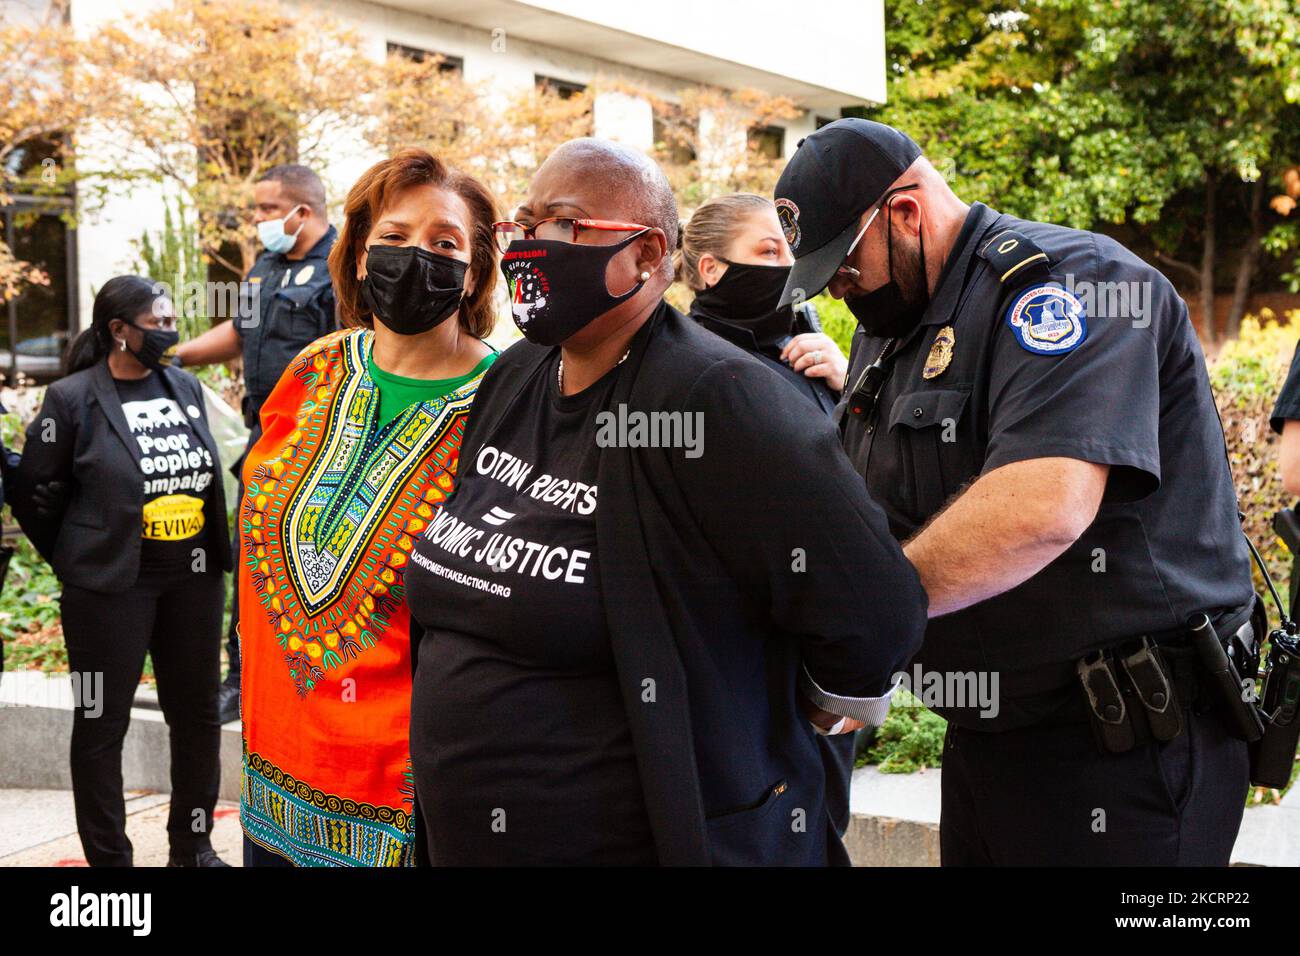 Deborah Scott (left) of Georgia STAND-UP waits while a Capitol Police officer adjusts the handcuffs on Melanie Campbell (center), president and CEO of the Black Women’s Roundtable, following arrest in a civil disobedience action for for voting rights and economic justice. Protesters are demanding that Congress to pass legislation protecting the right to vote and providing economic assistance to Americans. Specifically, they want passage of the Freedom to Vote Act, the Build Back Better Act, and the Infrastructure Investment and Jobs Act. (Photo by Allison Bailey/NurPhoto) Stock Photo